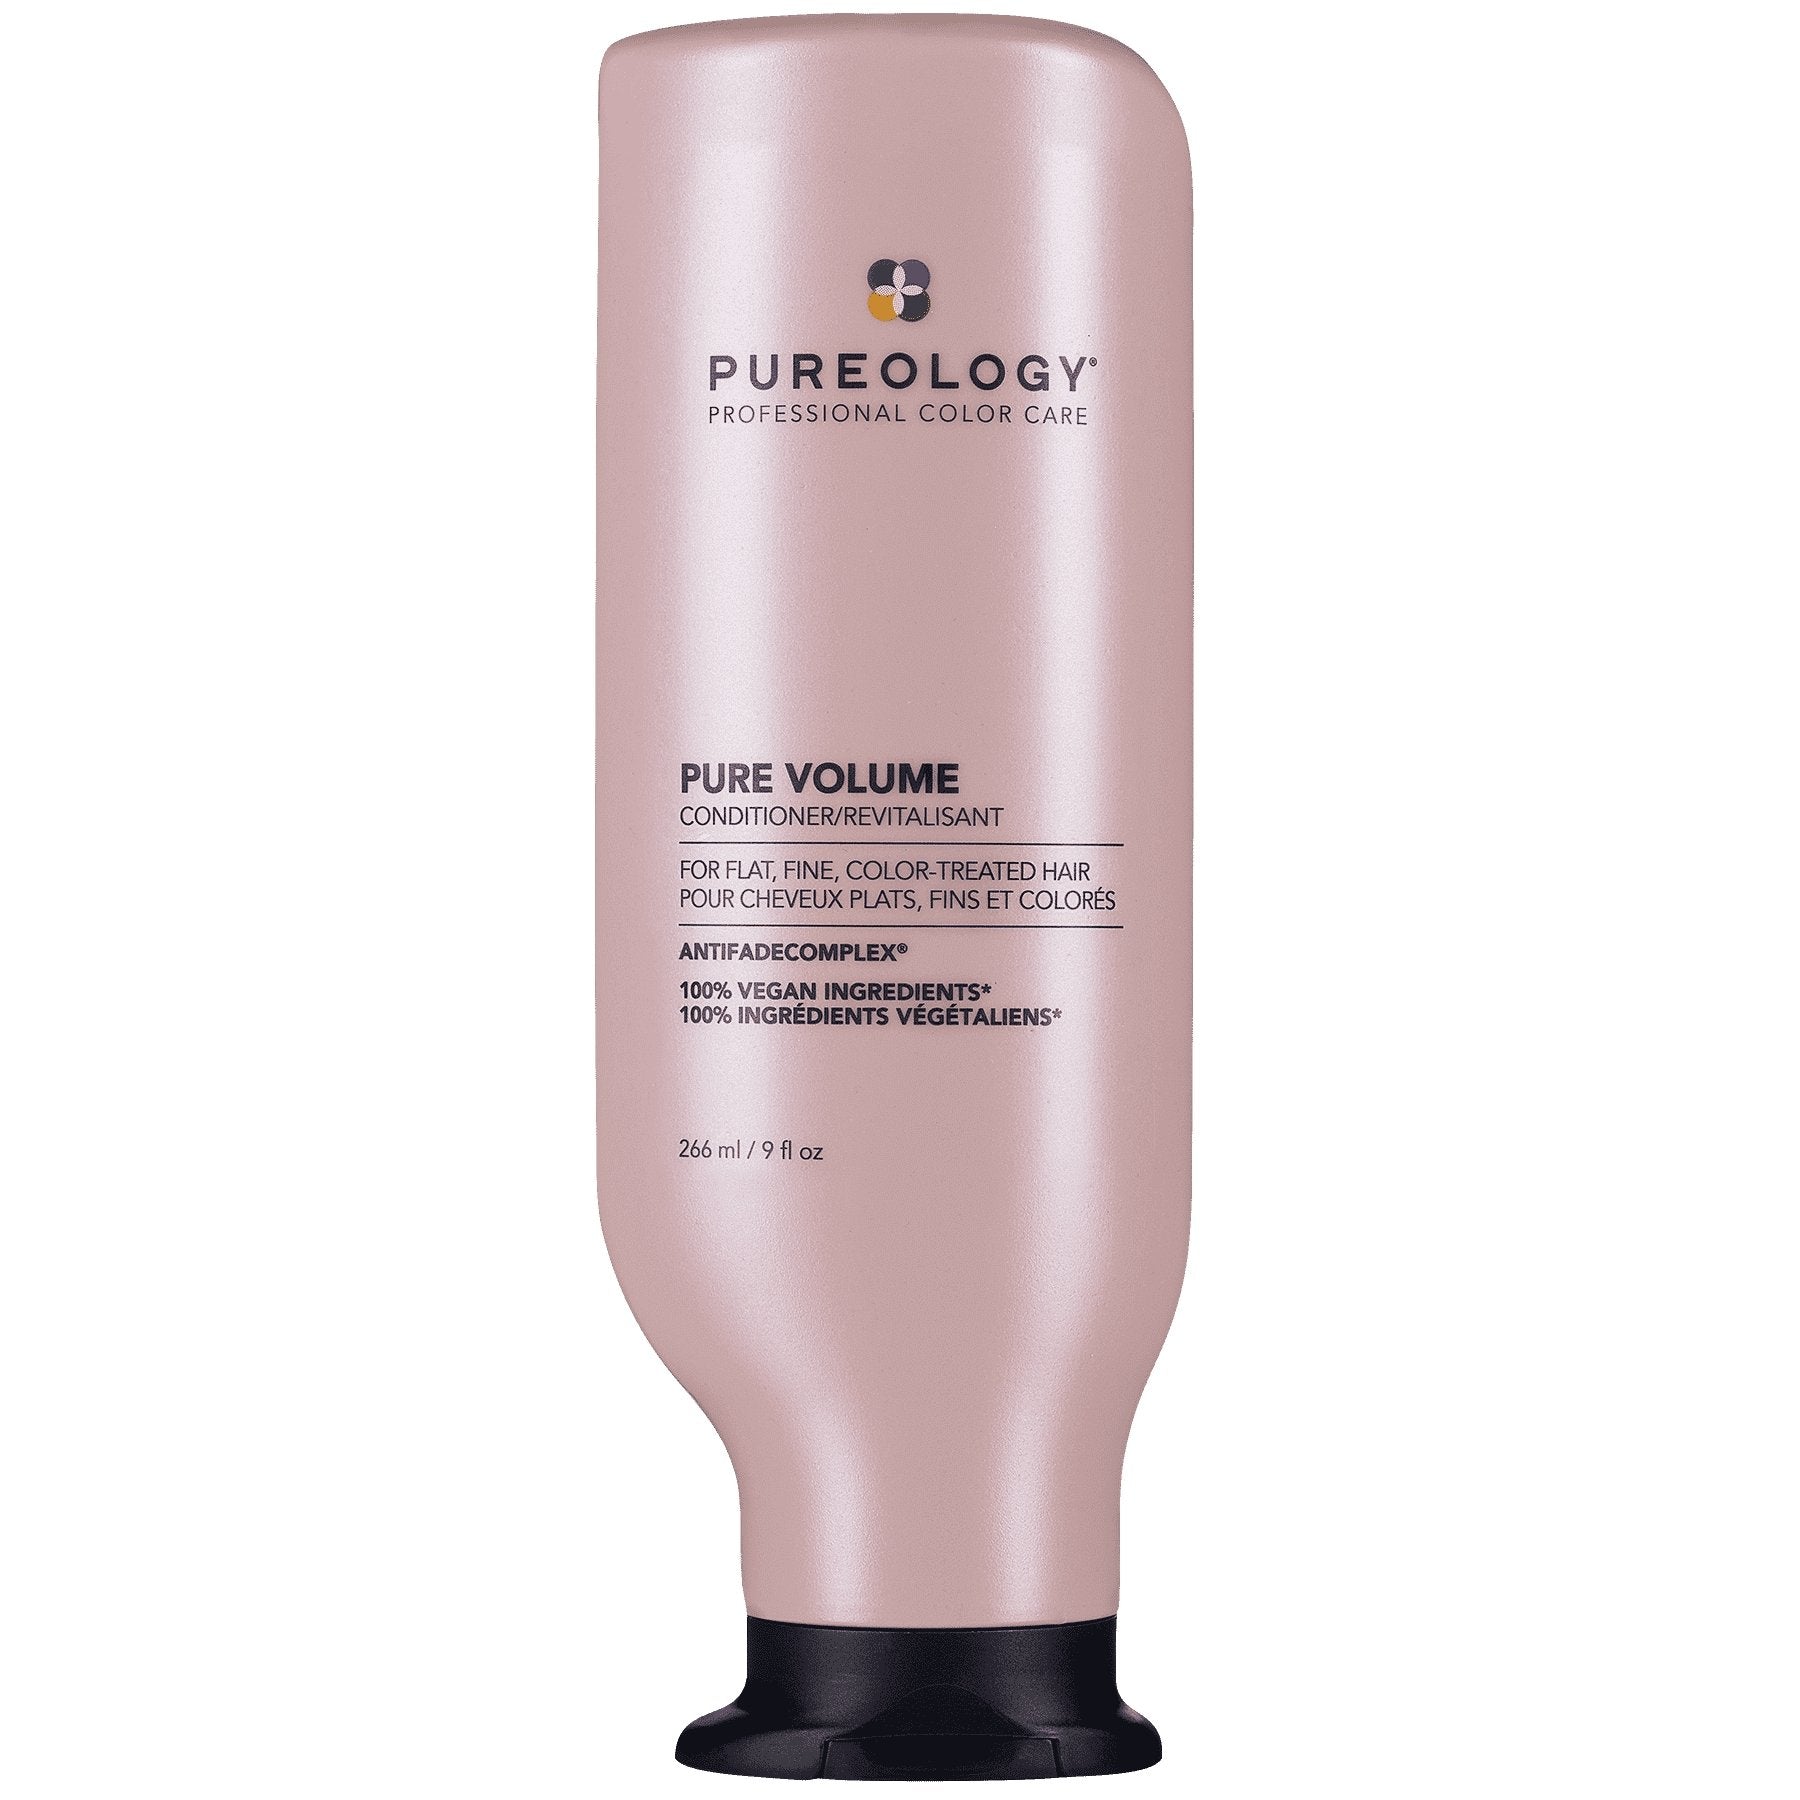 Pureology Pure Volume Conditioner - Blend Box